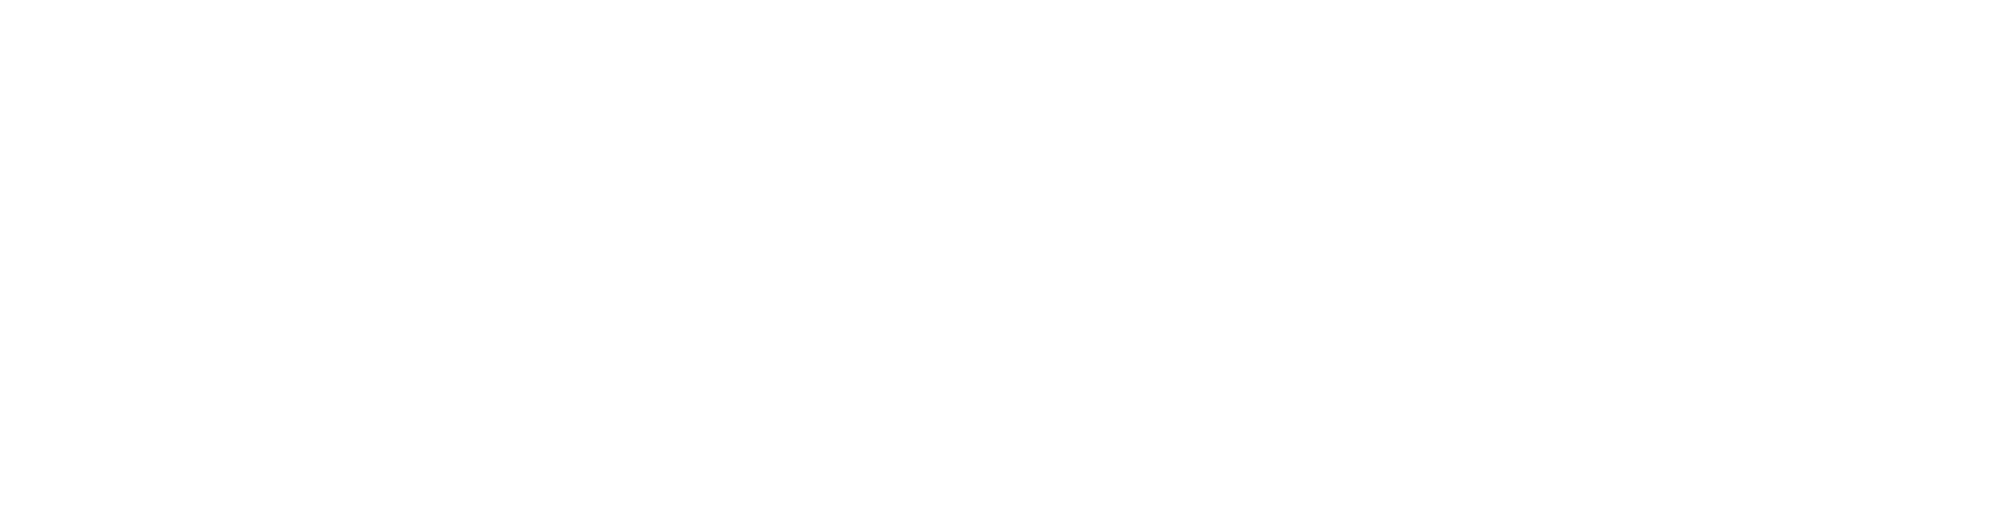 CentralSquare Technology Foundation Logo in white text